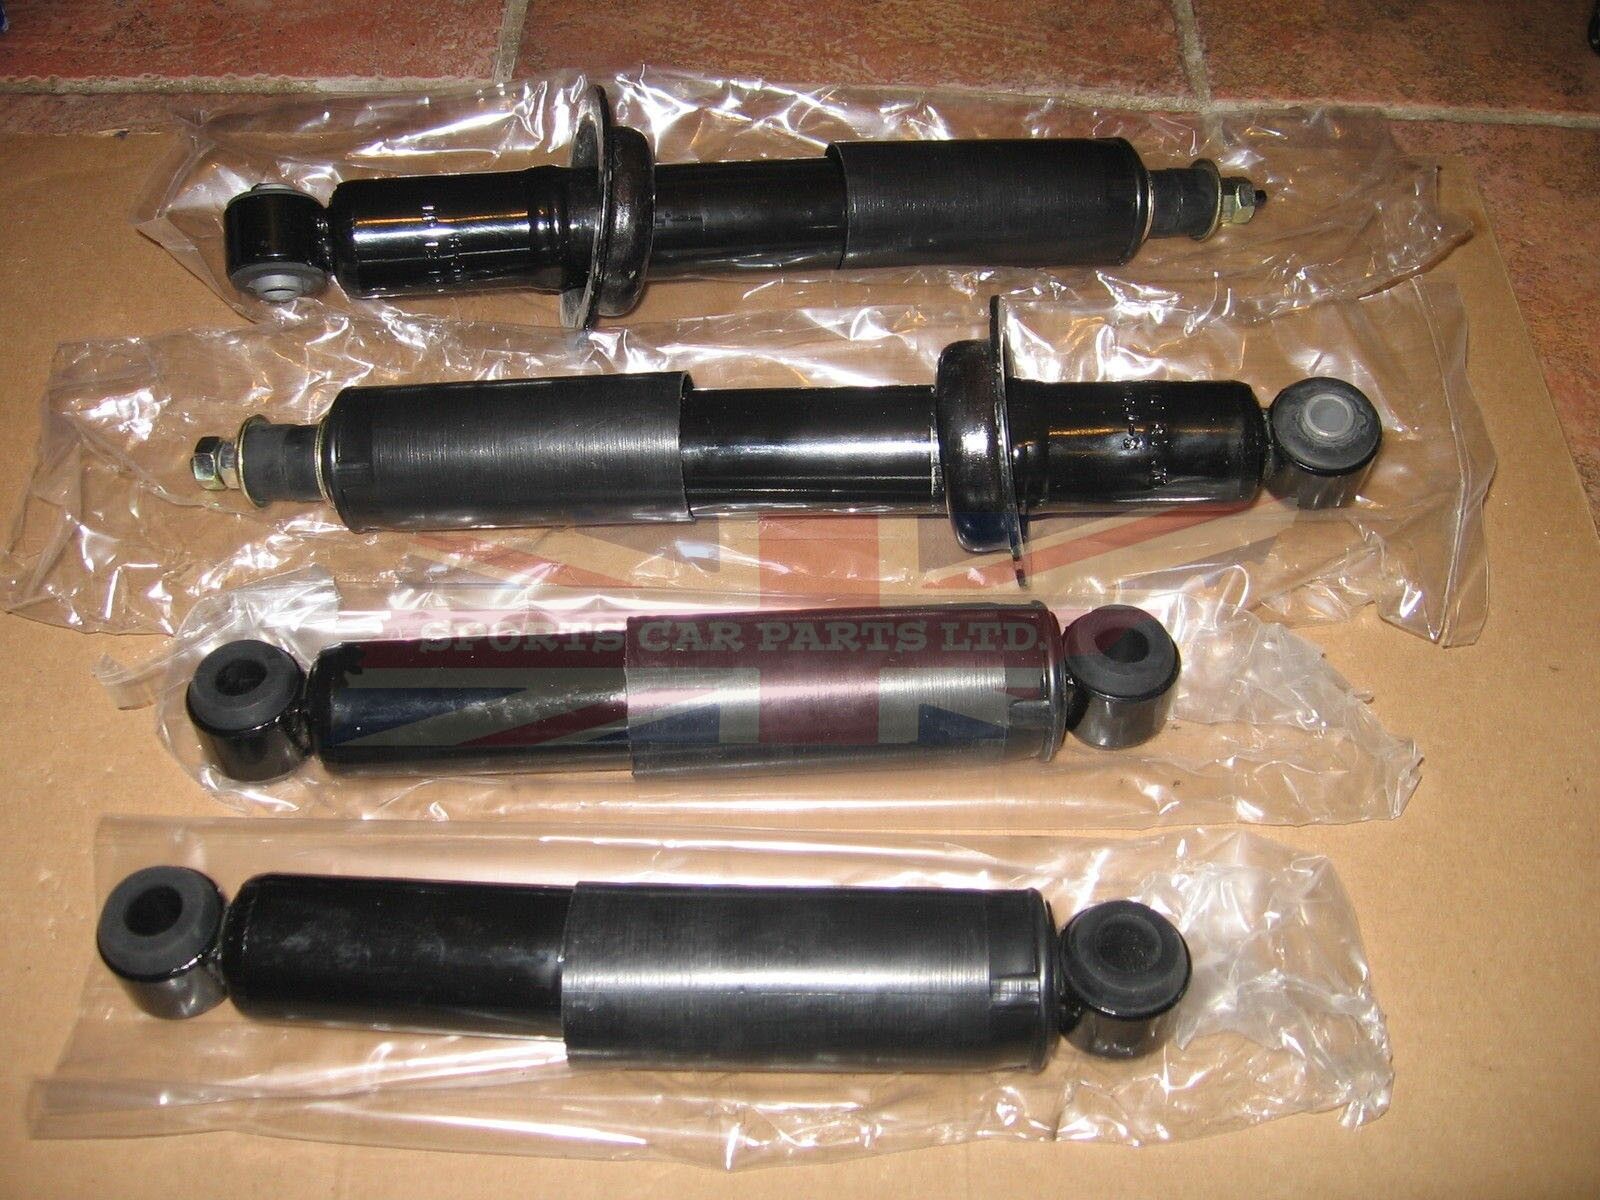 New Set of 4 Front & Rear Shock Absorbers Shocks Triumph Spitfire 1963-1980